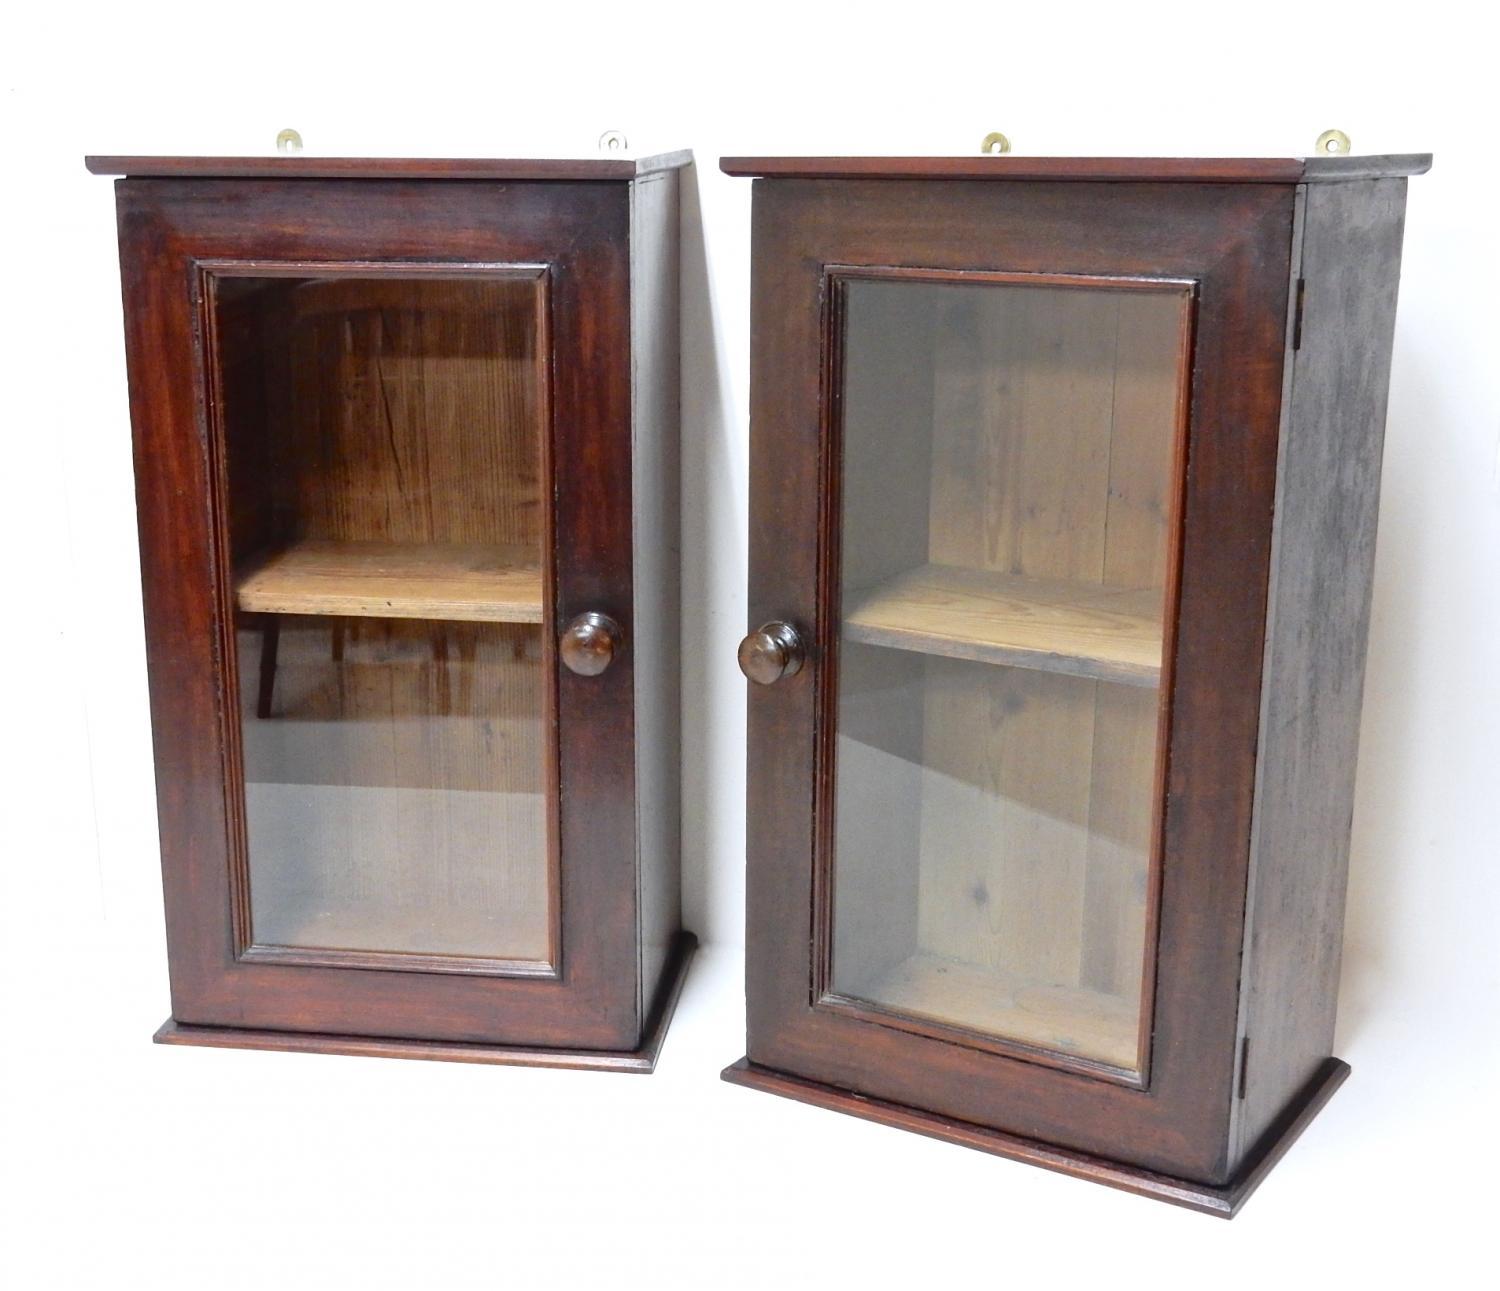 Antique Wall Cabinets